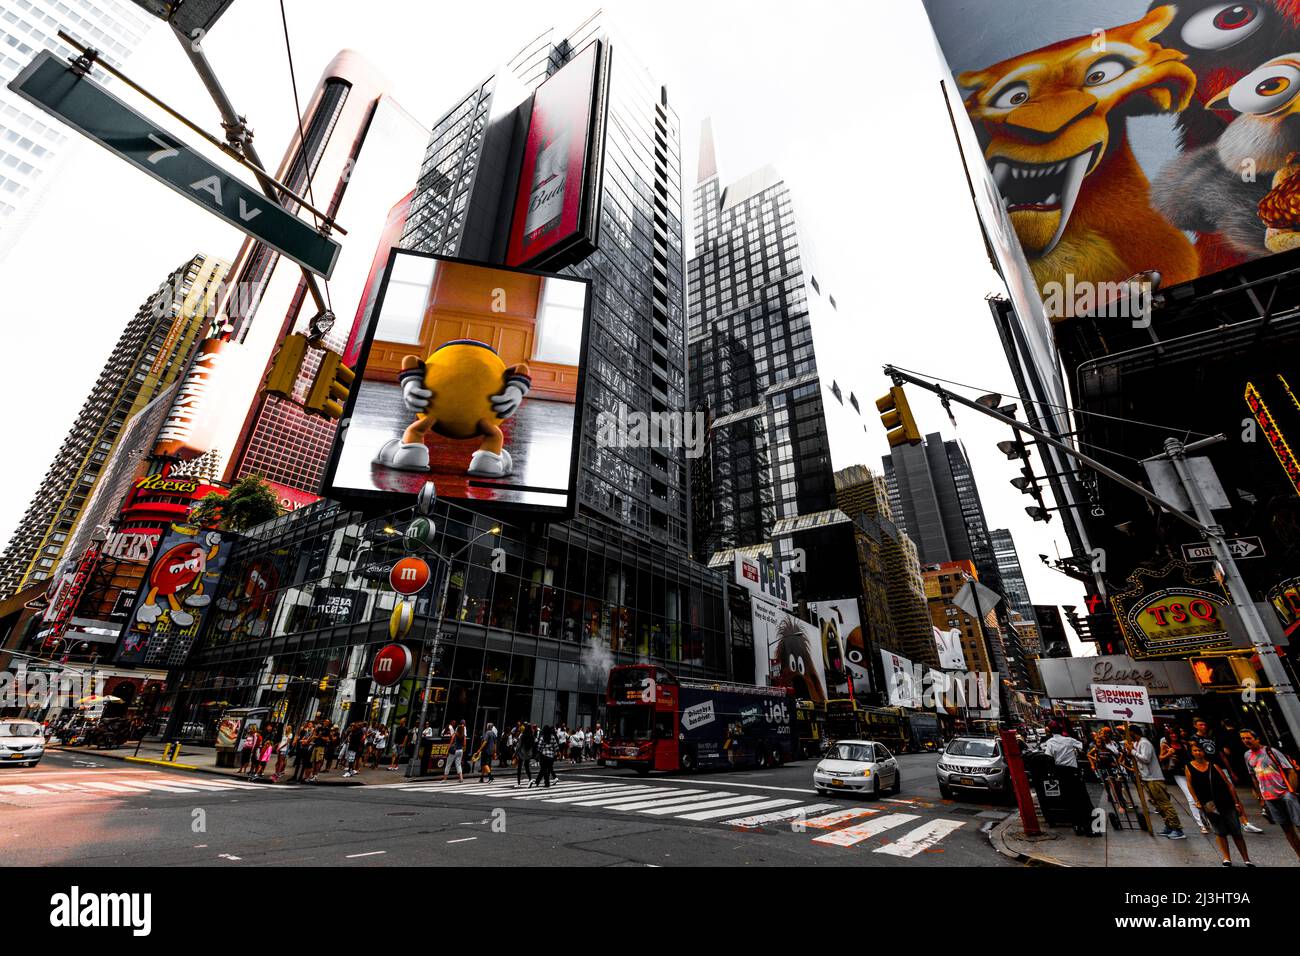 Theater District, New York City, NY, USA, So much happening at times square Stock Photo